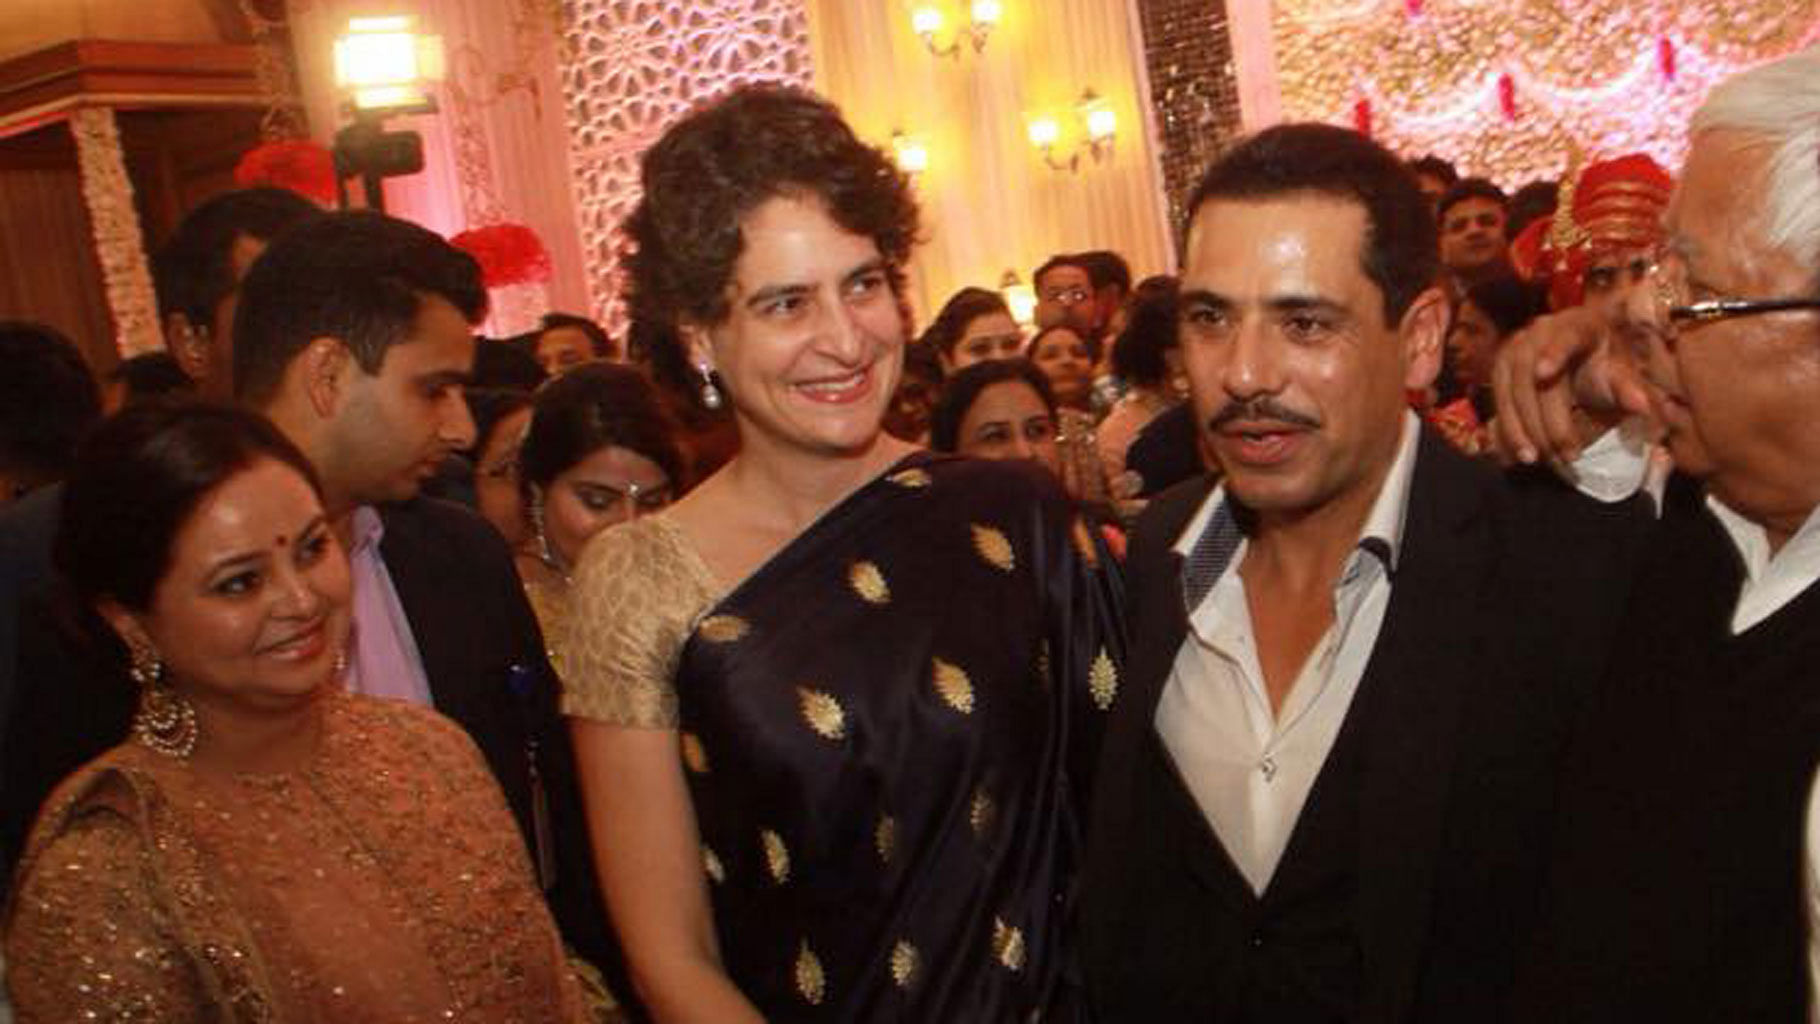 Businessman Robert Vadra with wife and Congress president Sonia Gandhi’s daughter Priyanka Gandhi (Photo Courtesy:<a href="https://www.facebook.com/photo.php?fbid=10155236003910029&amp;set=t.764044809&amp;type=3&amp;theater"> Facebook</a>)